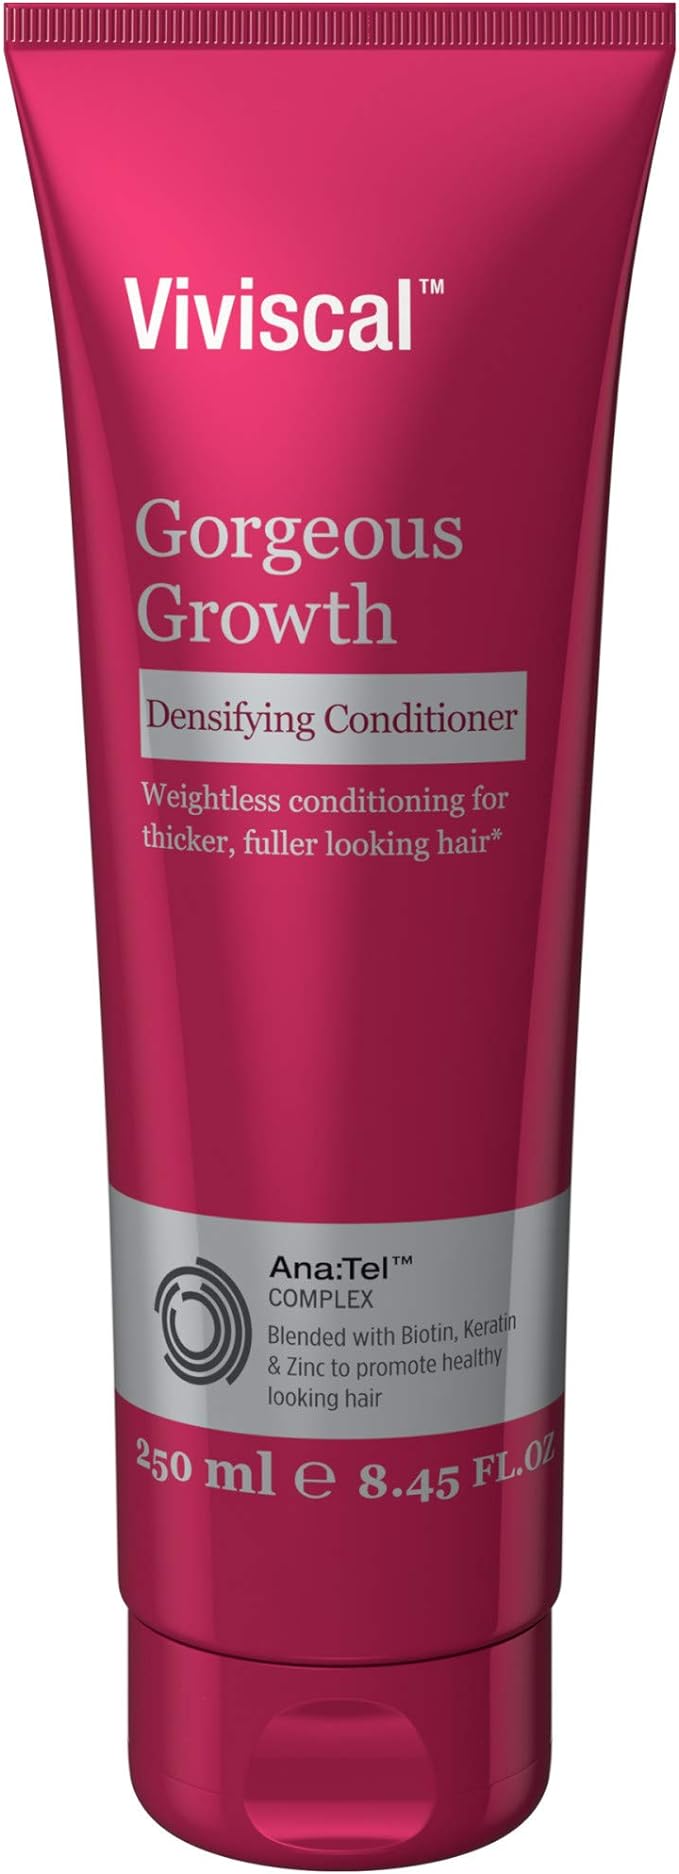 Gorgeous Growth Densifying Conditioner | Viviscal™ | 250 mL